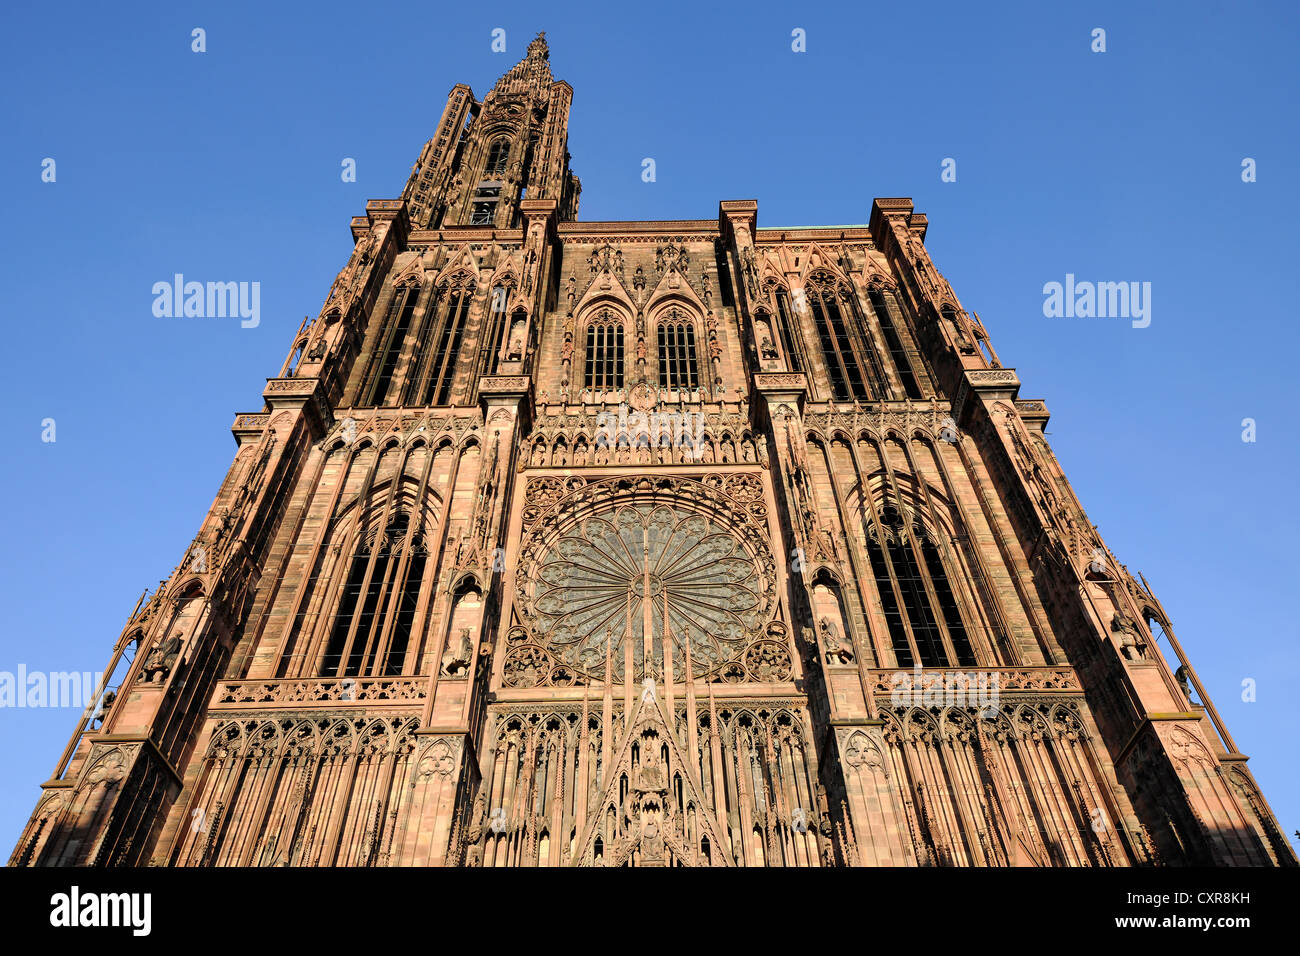 West facade, Strasbourg Cathedral, Cathedral of Our Lady of Strasbourg, Strasbourg, Bas-Rhin department, Alsace, France, Europe Stock Photo